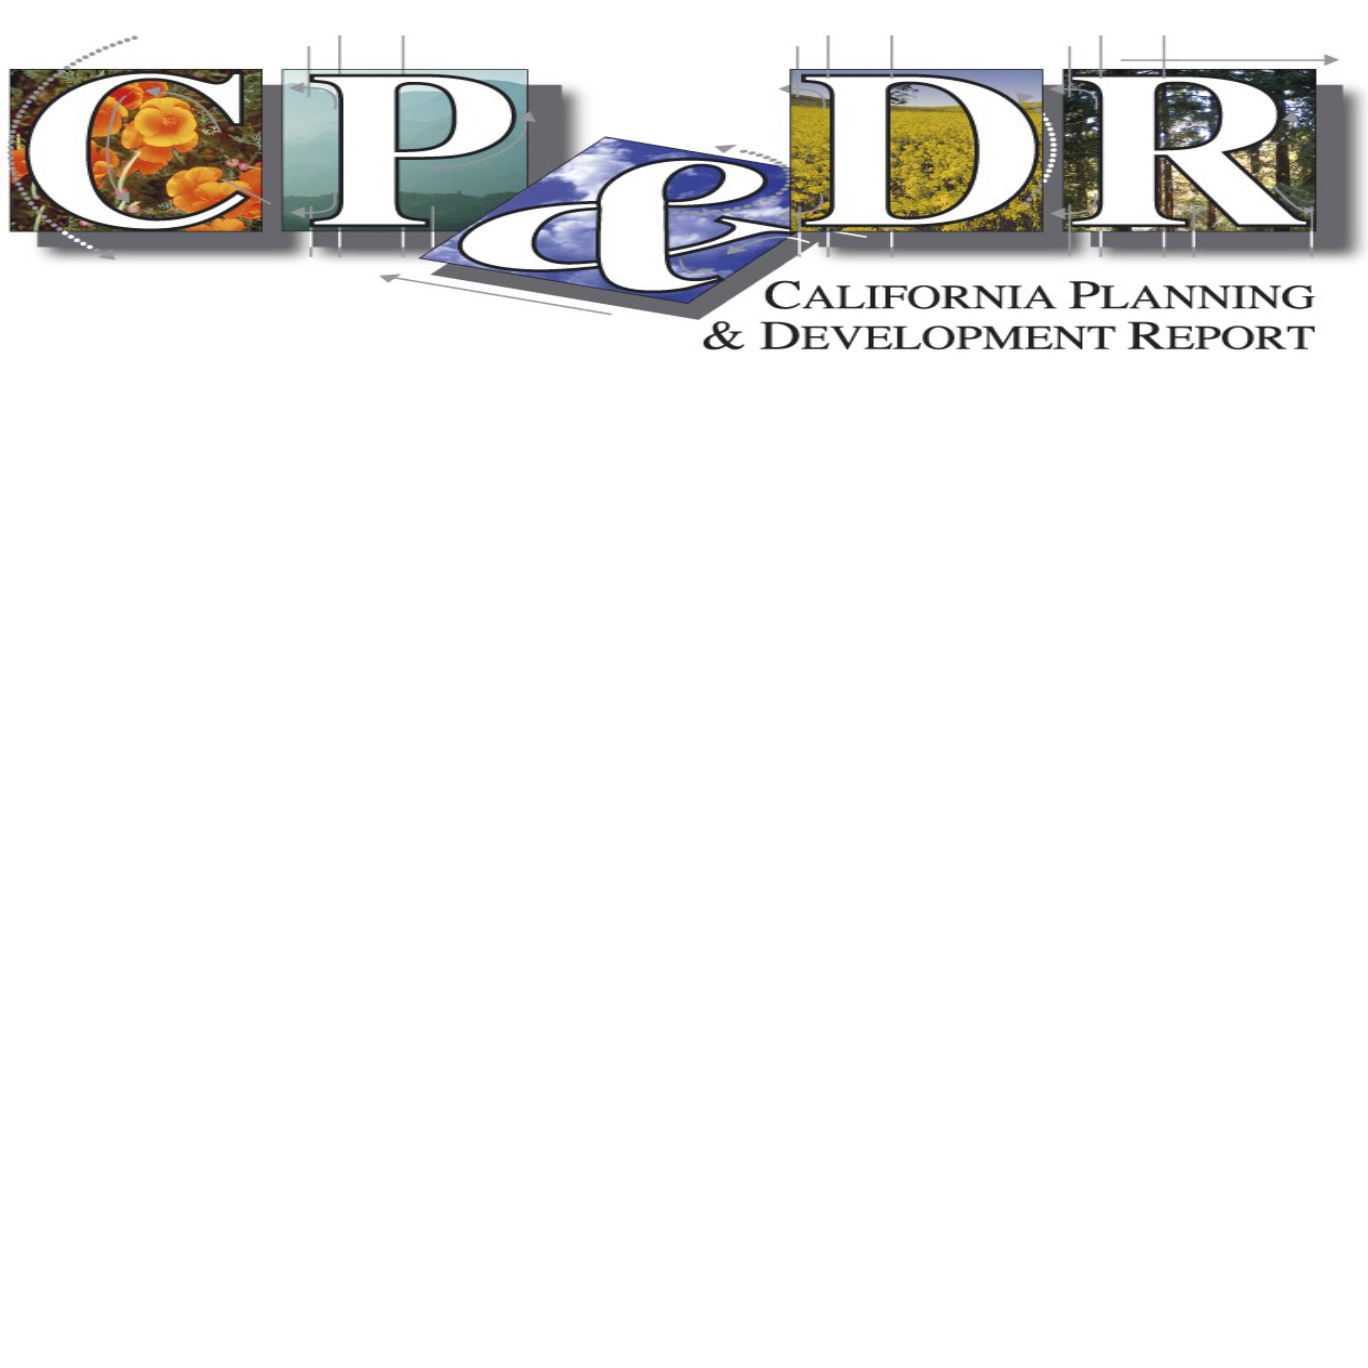 CP&DR News Briefs February 21, 2023: San Francisco Tax Lawsuit; Land-Use Bills; S.D. Development; and More